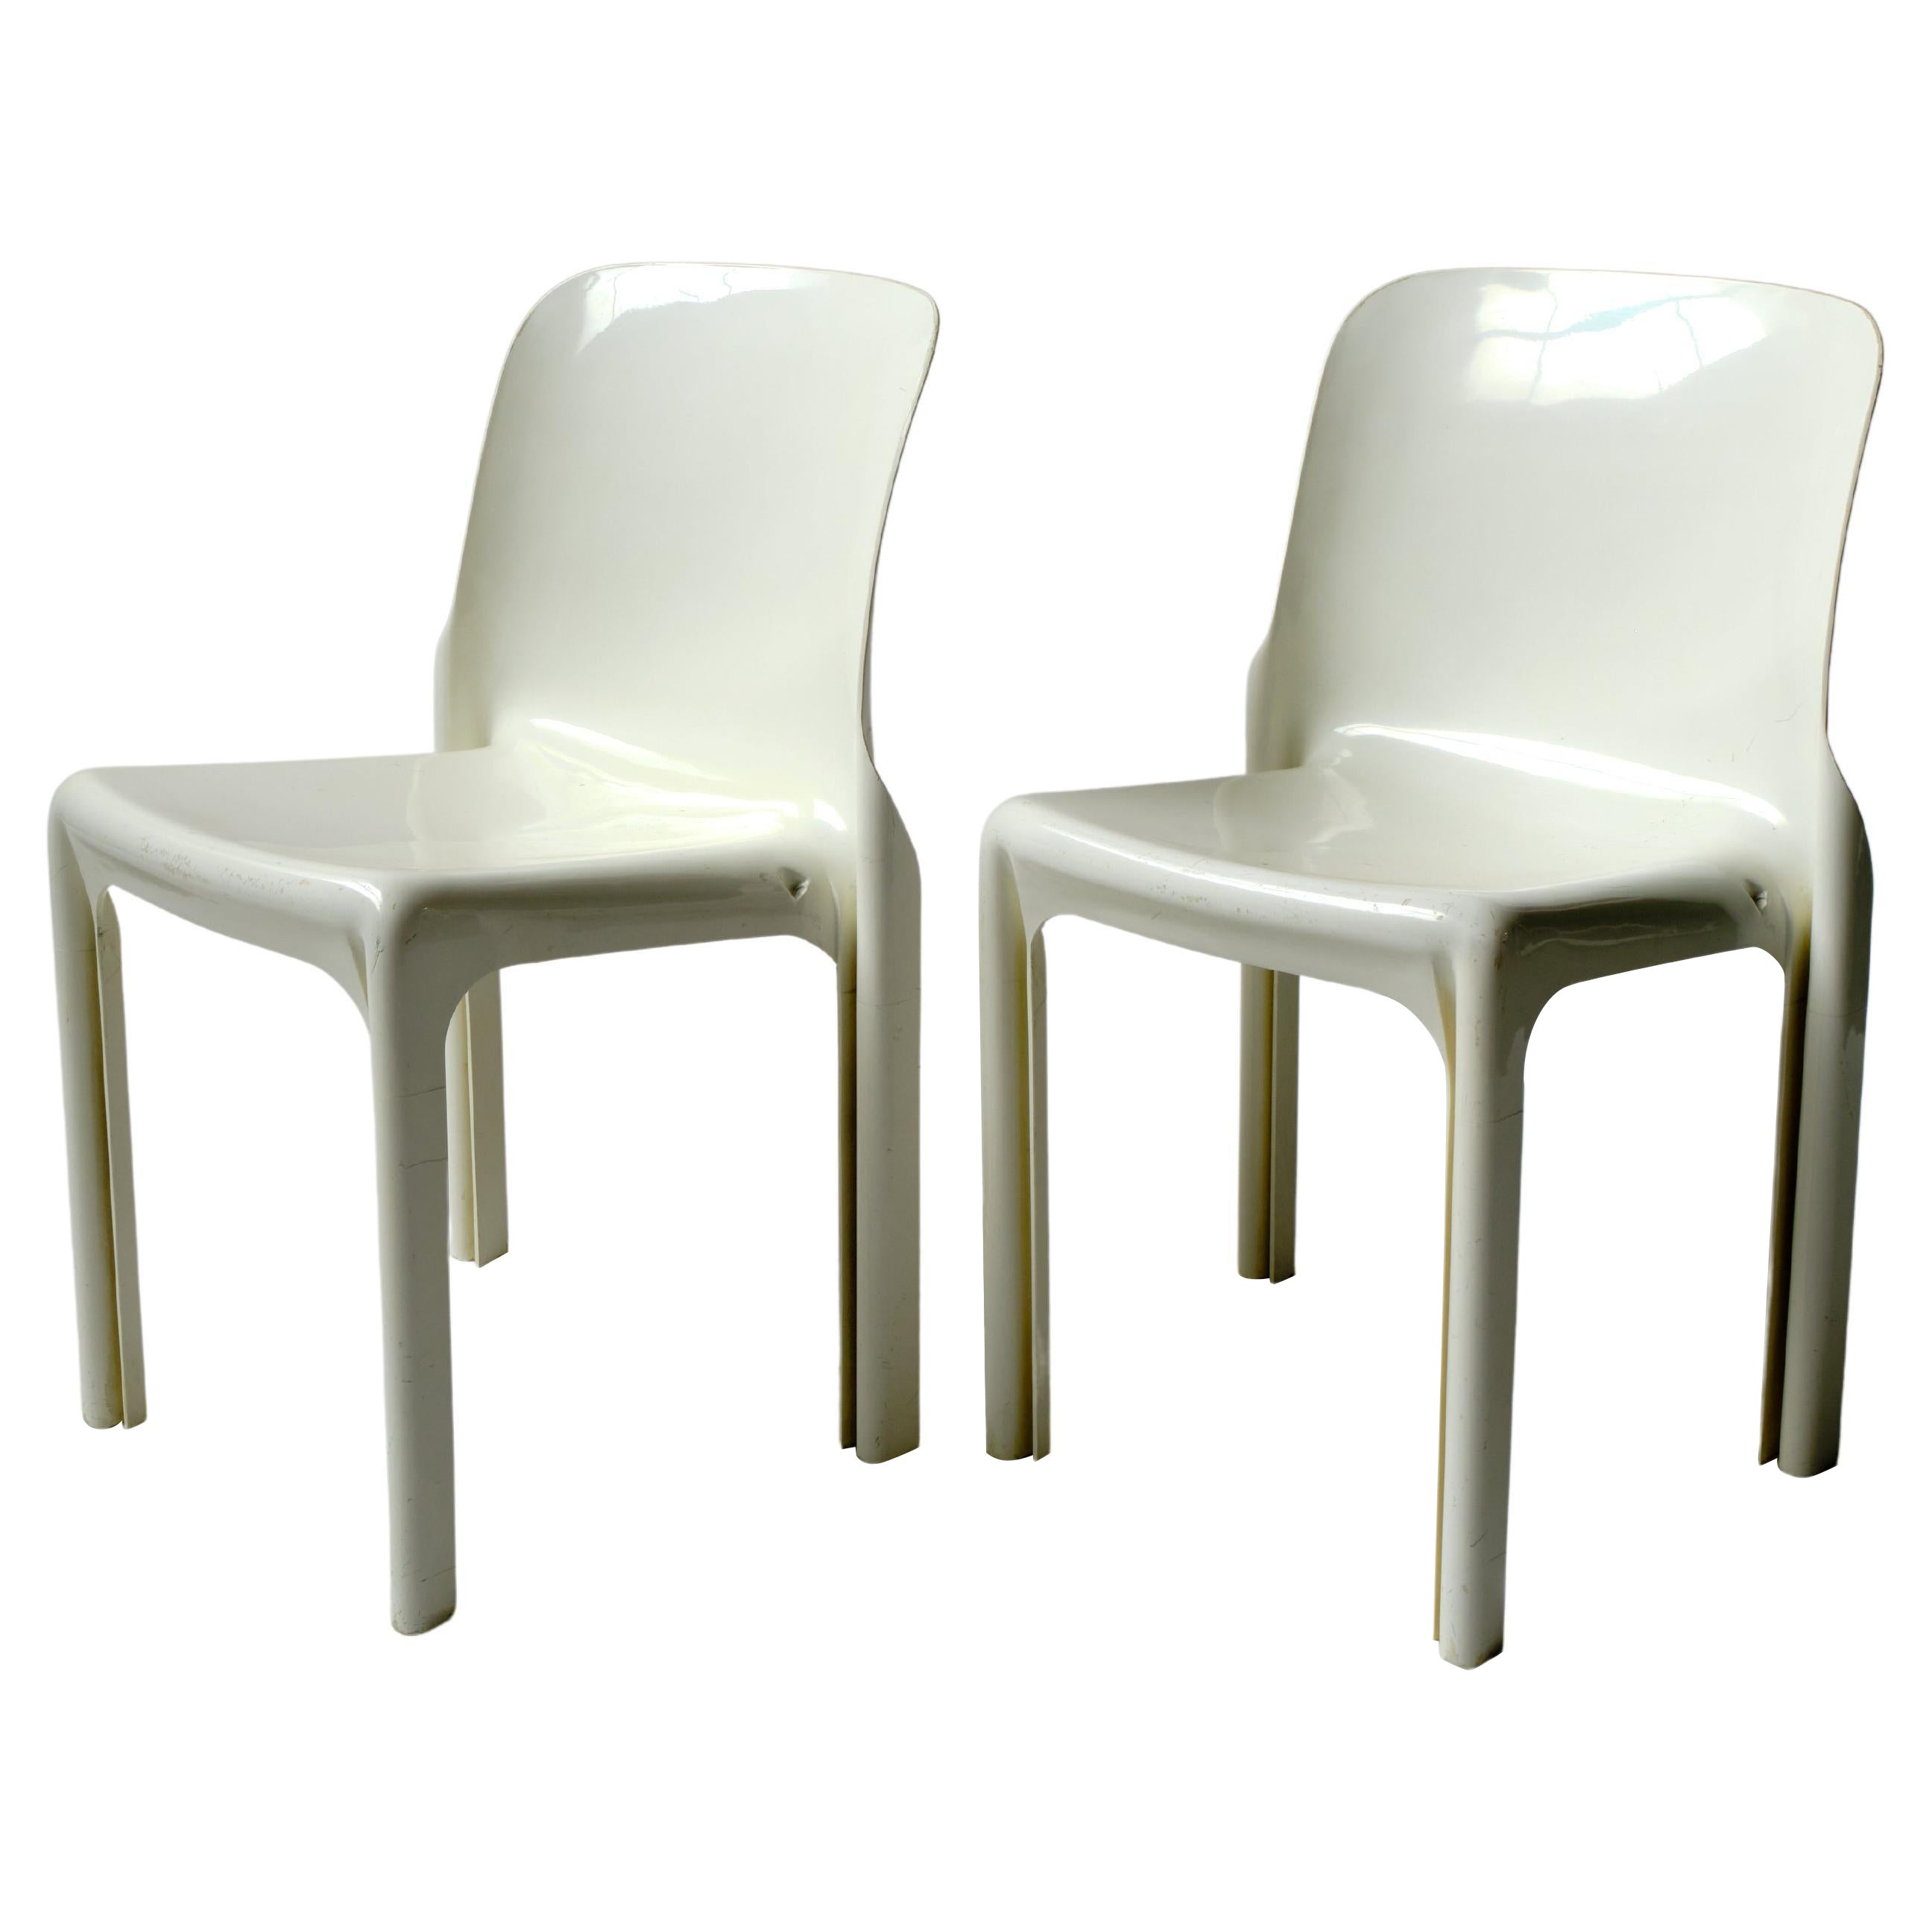 White Stackable Selene Chairs by Vico Magistretti for Artemide, Pair For Sale